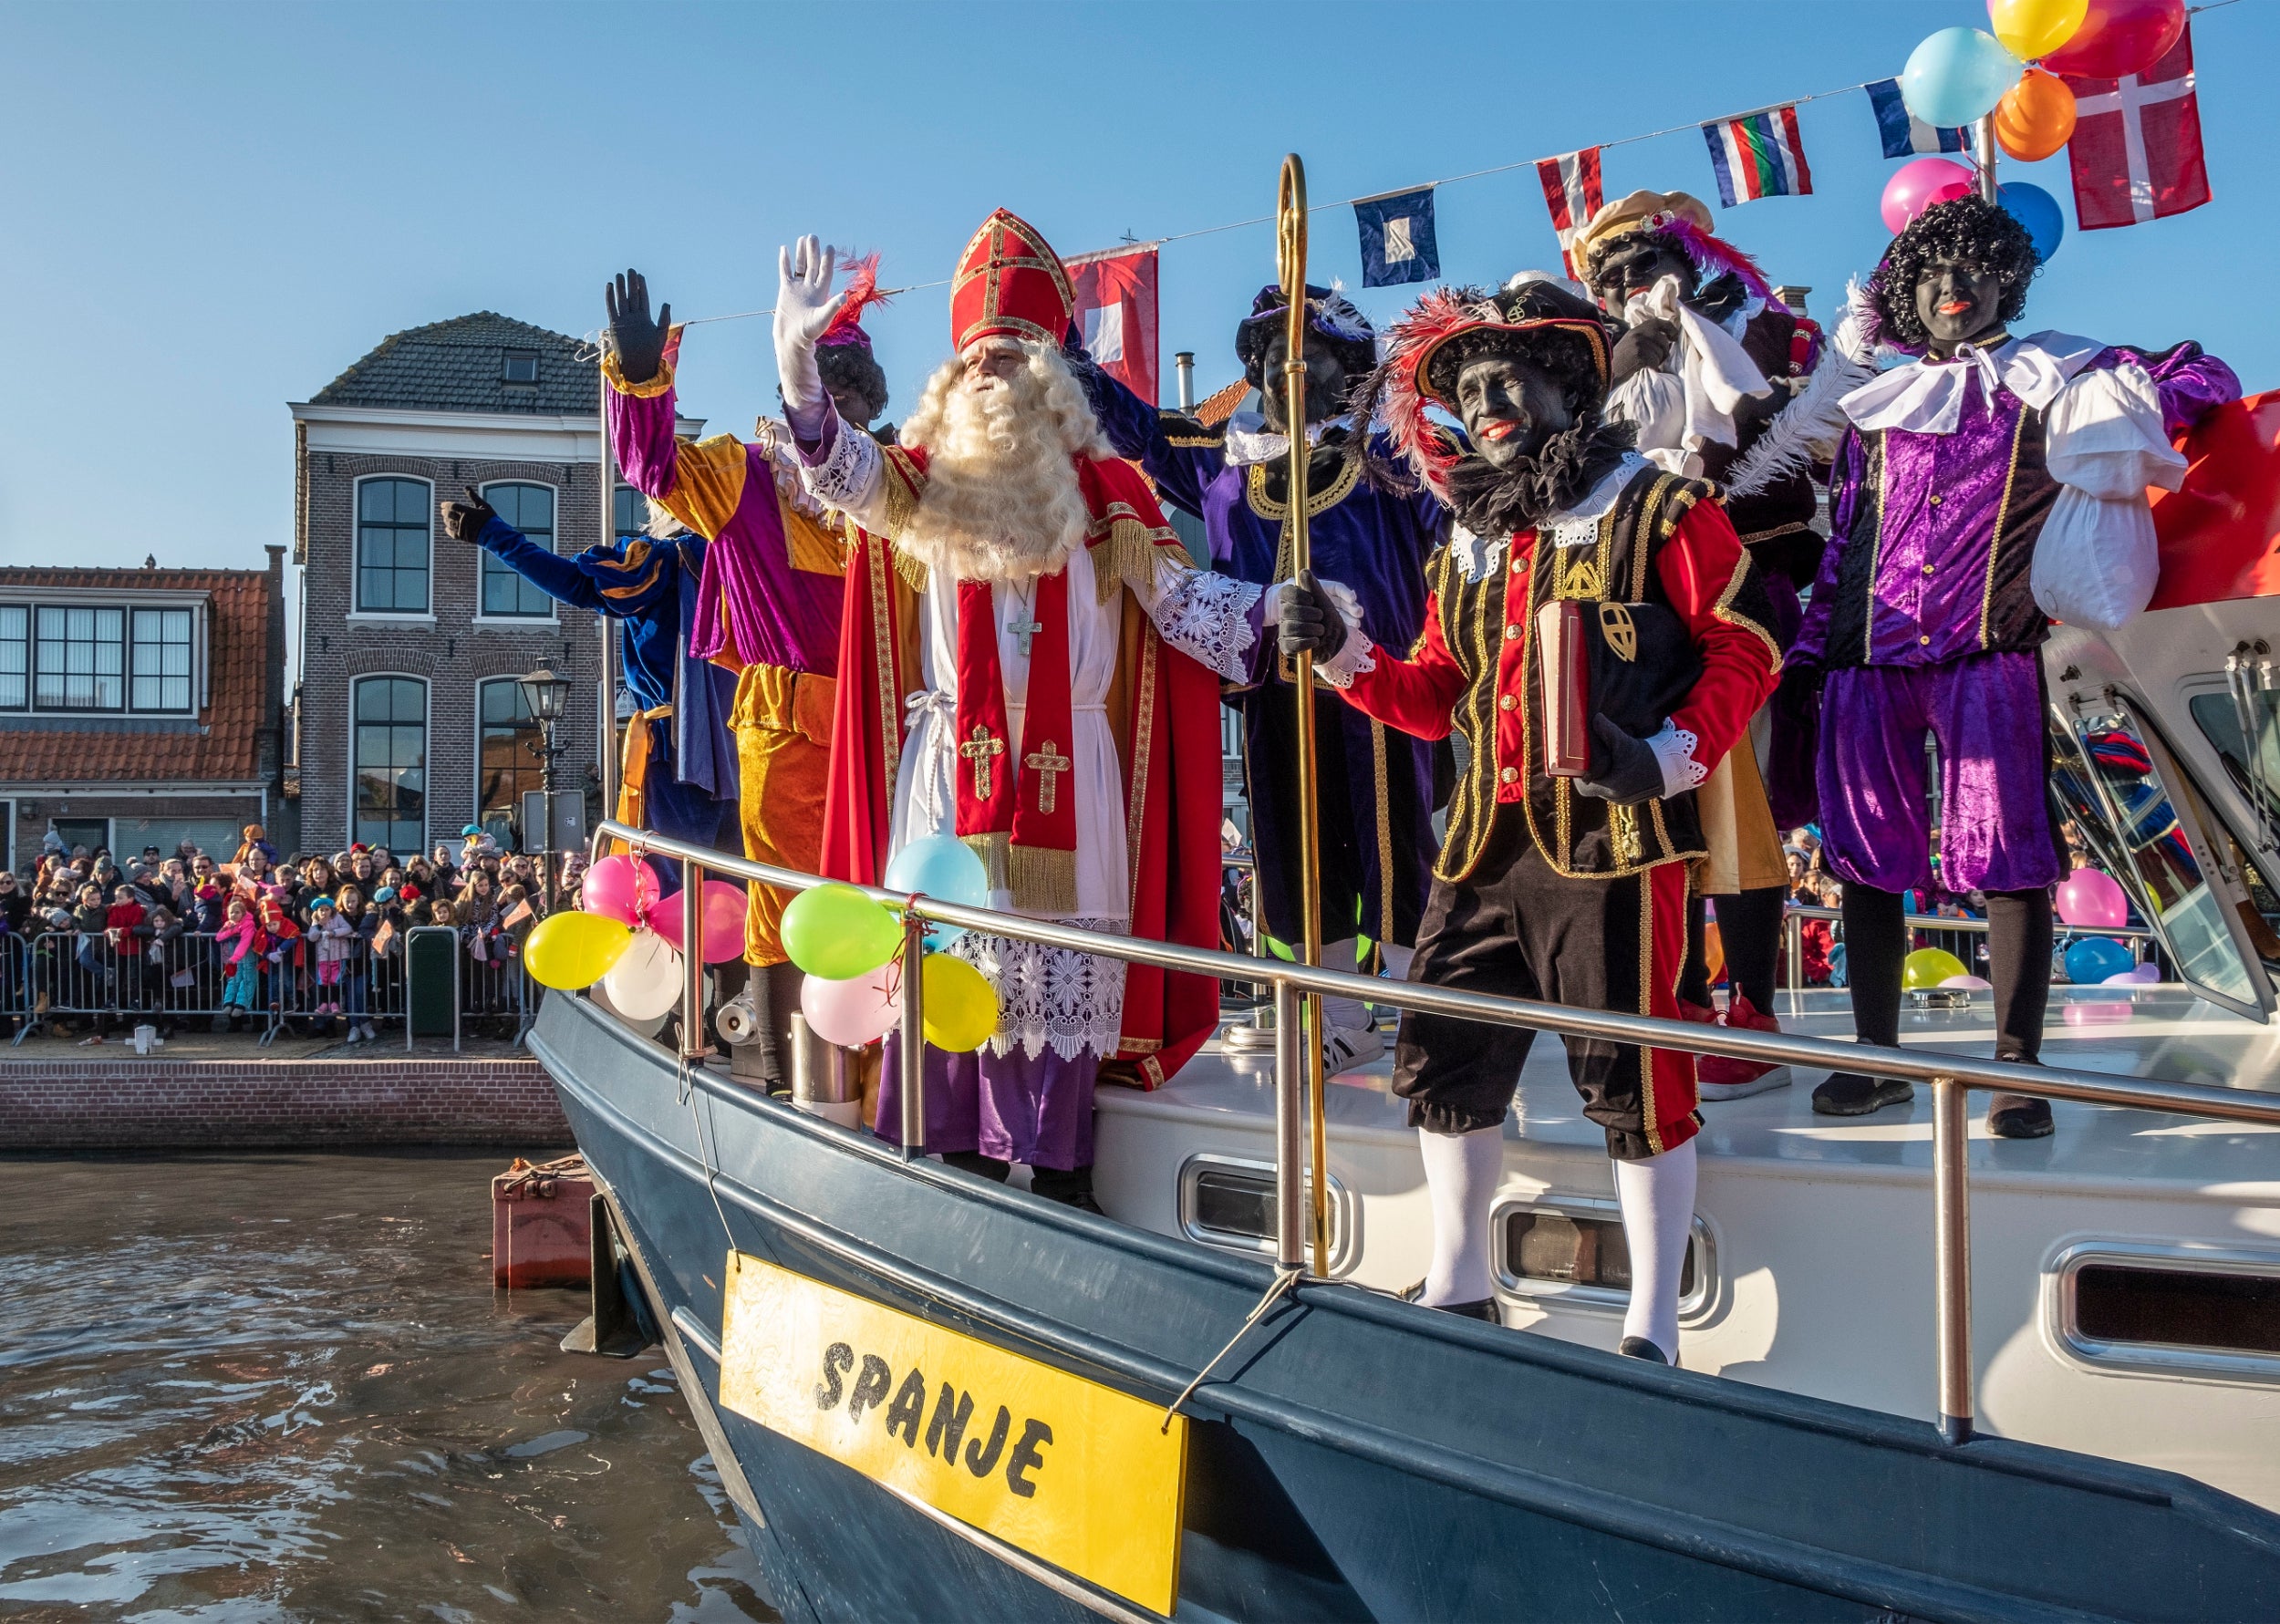 Black Pete protests: Anti-racism demonstrations in Netherlands over Christmas blackface character